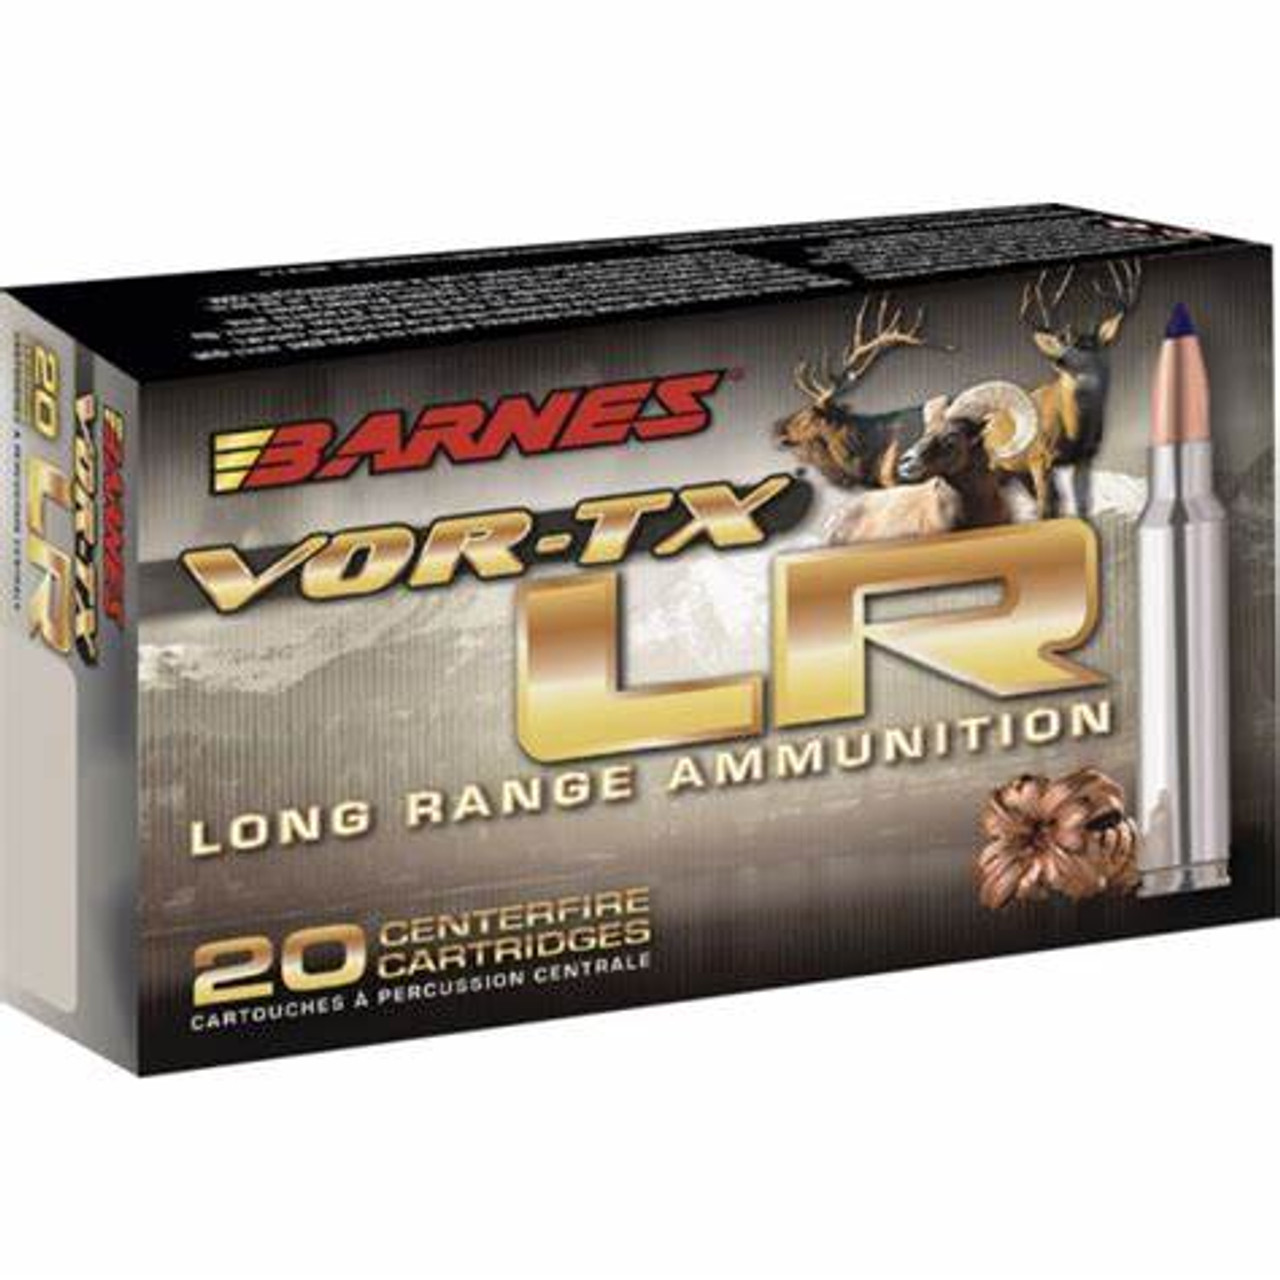 VOR-TX LR PREMIUM HUNTING AMMUNITION

THE WORLD'S FIRST HUNTING LOAD OPTIMIZED FOR ONE-SHOT KILLS OUT TO 700 YARDS AND BEYOND*.

VOR-TX LR is an extreme-distance load combining super-premium components that are assembled with a level of precision never before attained in factory ammunition. The specially engineered LRX bullets loaded in VOR-TX LR are optimized specifically for the cartridge. Unmatched flight characteristics combined with a specially engineered nose cavity that peels back into four cutting petals delivers massive expansion and identical on-game devastation from up close to well past 700 yards (*refer to cartridge ballistics and shoot responsibly).

Each box includes ballistic charts that identify the G1 ballistic coefficient and address variables such as velocity, drop, energy and wind deflection – calculated at sea level and 5000 feet elevation. More detailed information such as the G7 ballistic coefficient and long range dope calculated in MOA & MILS can be found here under the BALLISTICS tab below.

VOR-TX LR achieves match-grade accuracy and unmatched terminal performance on game at close and extreme distances delivers the quick, clean, ethical kills you’ve come to expect from Barnes. Distance can change all it wants. The terminal performance of VOR-TX LR never will.

LONG RANGE HUNTING

Barnes LRX bullets have been developed to match the advancements in rifle accuracy and extended-range optics. The LRX features a long profile and boattail design that delivers match-grade accuracy at long range with an incredibly high ballistic coefficient and terminal performance that delivers the quick, clean, ethical kills you've come to expect from Barnes.

The all-copper LRX (Long Range X Bullet) opens instantly on impact into four razor-sharp petals that plow a wide wound channel and deposit massive amounts of energy throughout the entire length of the cavity. High weight retention sustains bullet momentum for maximum destruction of tissue, bone and vital organs to effectively and humanely take down game at close and extreme distances.

LRX BULLETS ARE DESIGNED TO MATCH THE LATEST ADVANCEMENTS IN FIREARMS AND EXTENDED RANGE OPTICS CAPABILITIES.

Doppler radar technology was utilized in the development process to optimize the bullet’s profile for low drag and top accuracy at extreme distances. Its long-range precision previously available only to handloaders – ready and loaded for your hunt in VOR-TX LR Long Range Ammunition.

Polymer tip boosts ballistic coefficient and initiates rapid expansion

Specially engineered scored nose cavity expands into four razor-sharp petals and a large frontal diameter for maximum energy transfer and deep penetration on game at close and extreme distances

Accu-Groove technology for minimal fouling and superior accuracy

Boattail design with precision heel radius